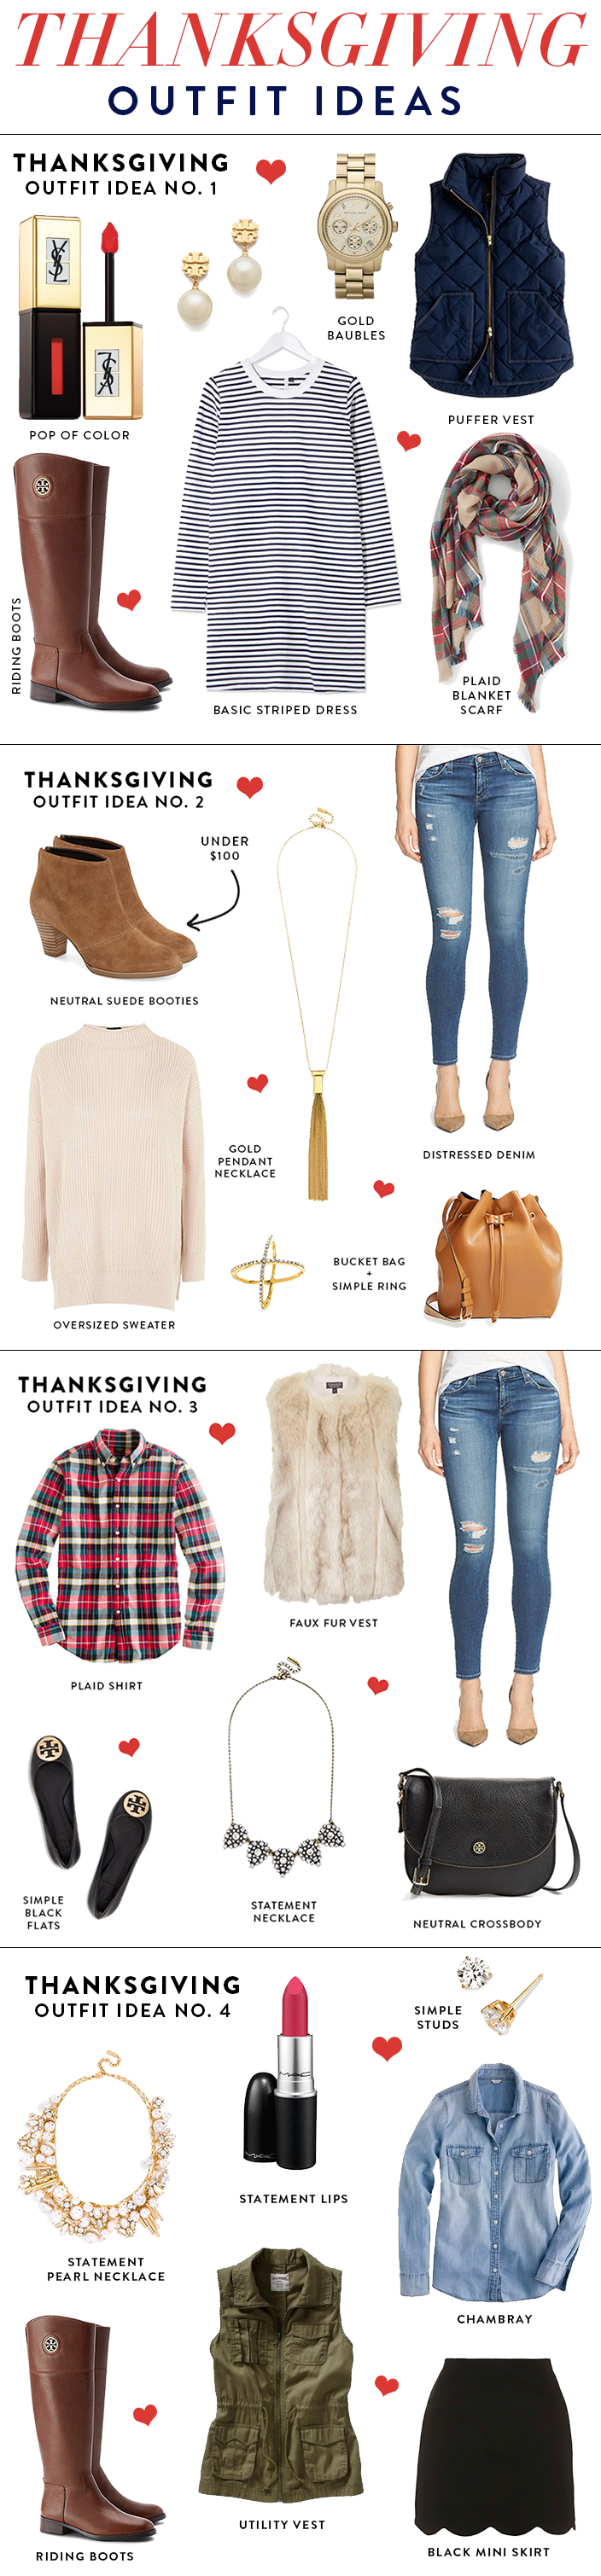 what to wear to thanks giving - 4 different thanksgiving outfit ideas